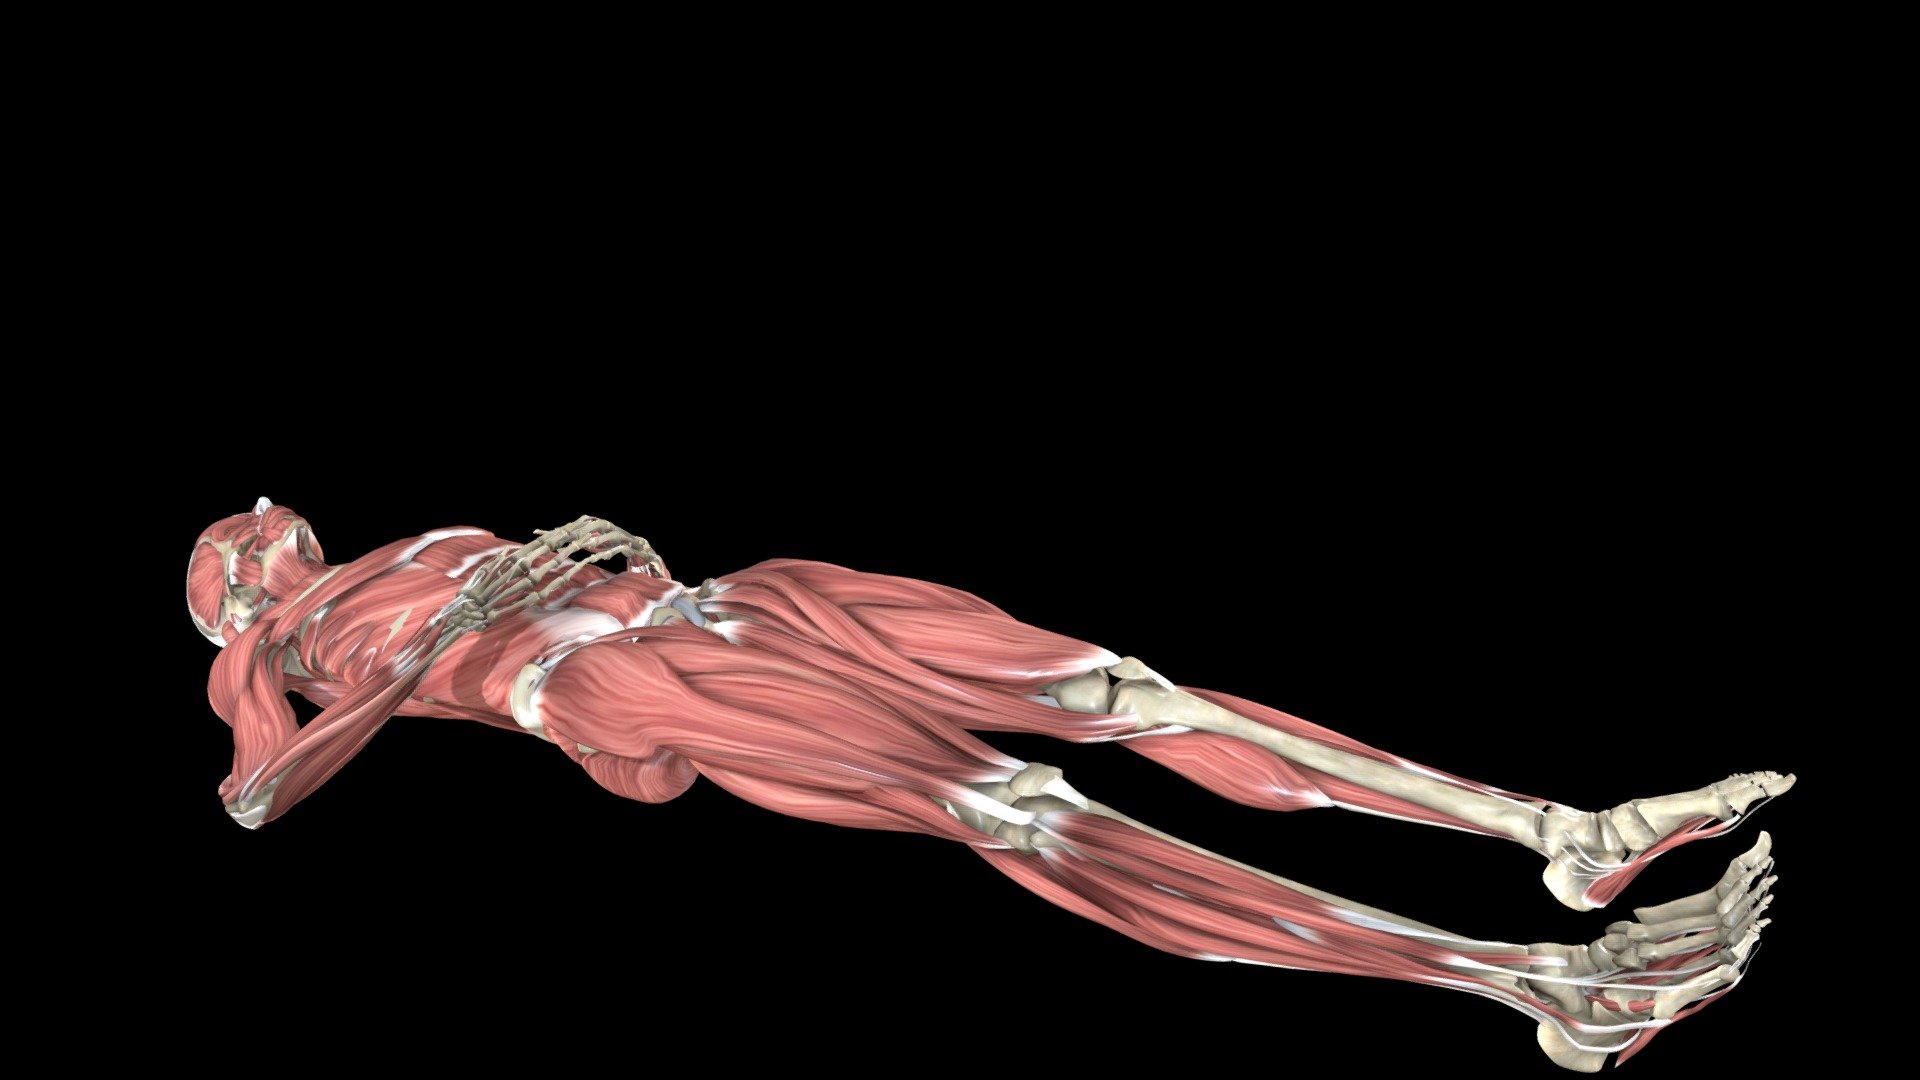 Posterior Sag Sign (Gravity Drawer Test) Tests for rotary instability posteriorly and/or torn PCL. In supine subjects hip and knee are flexed to 90°while the examiner supports the leg under the lower calf or heel in the air. A positive sign is a posterior sag of the tibia caused by gravitational pull.

©Indiana University Board of Trustees. This project was funded by a grant from the Indiana University School of Medicine Program to Launch those Underrepresented in Medicine toward Success (PLUS) and the Medical Student Education Division of the Indiana University School of Medicine, Department of Family Medicine. 3D imaging created by Luke Parker and Emma Parker 3d model